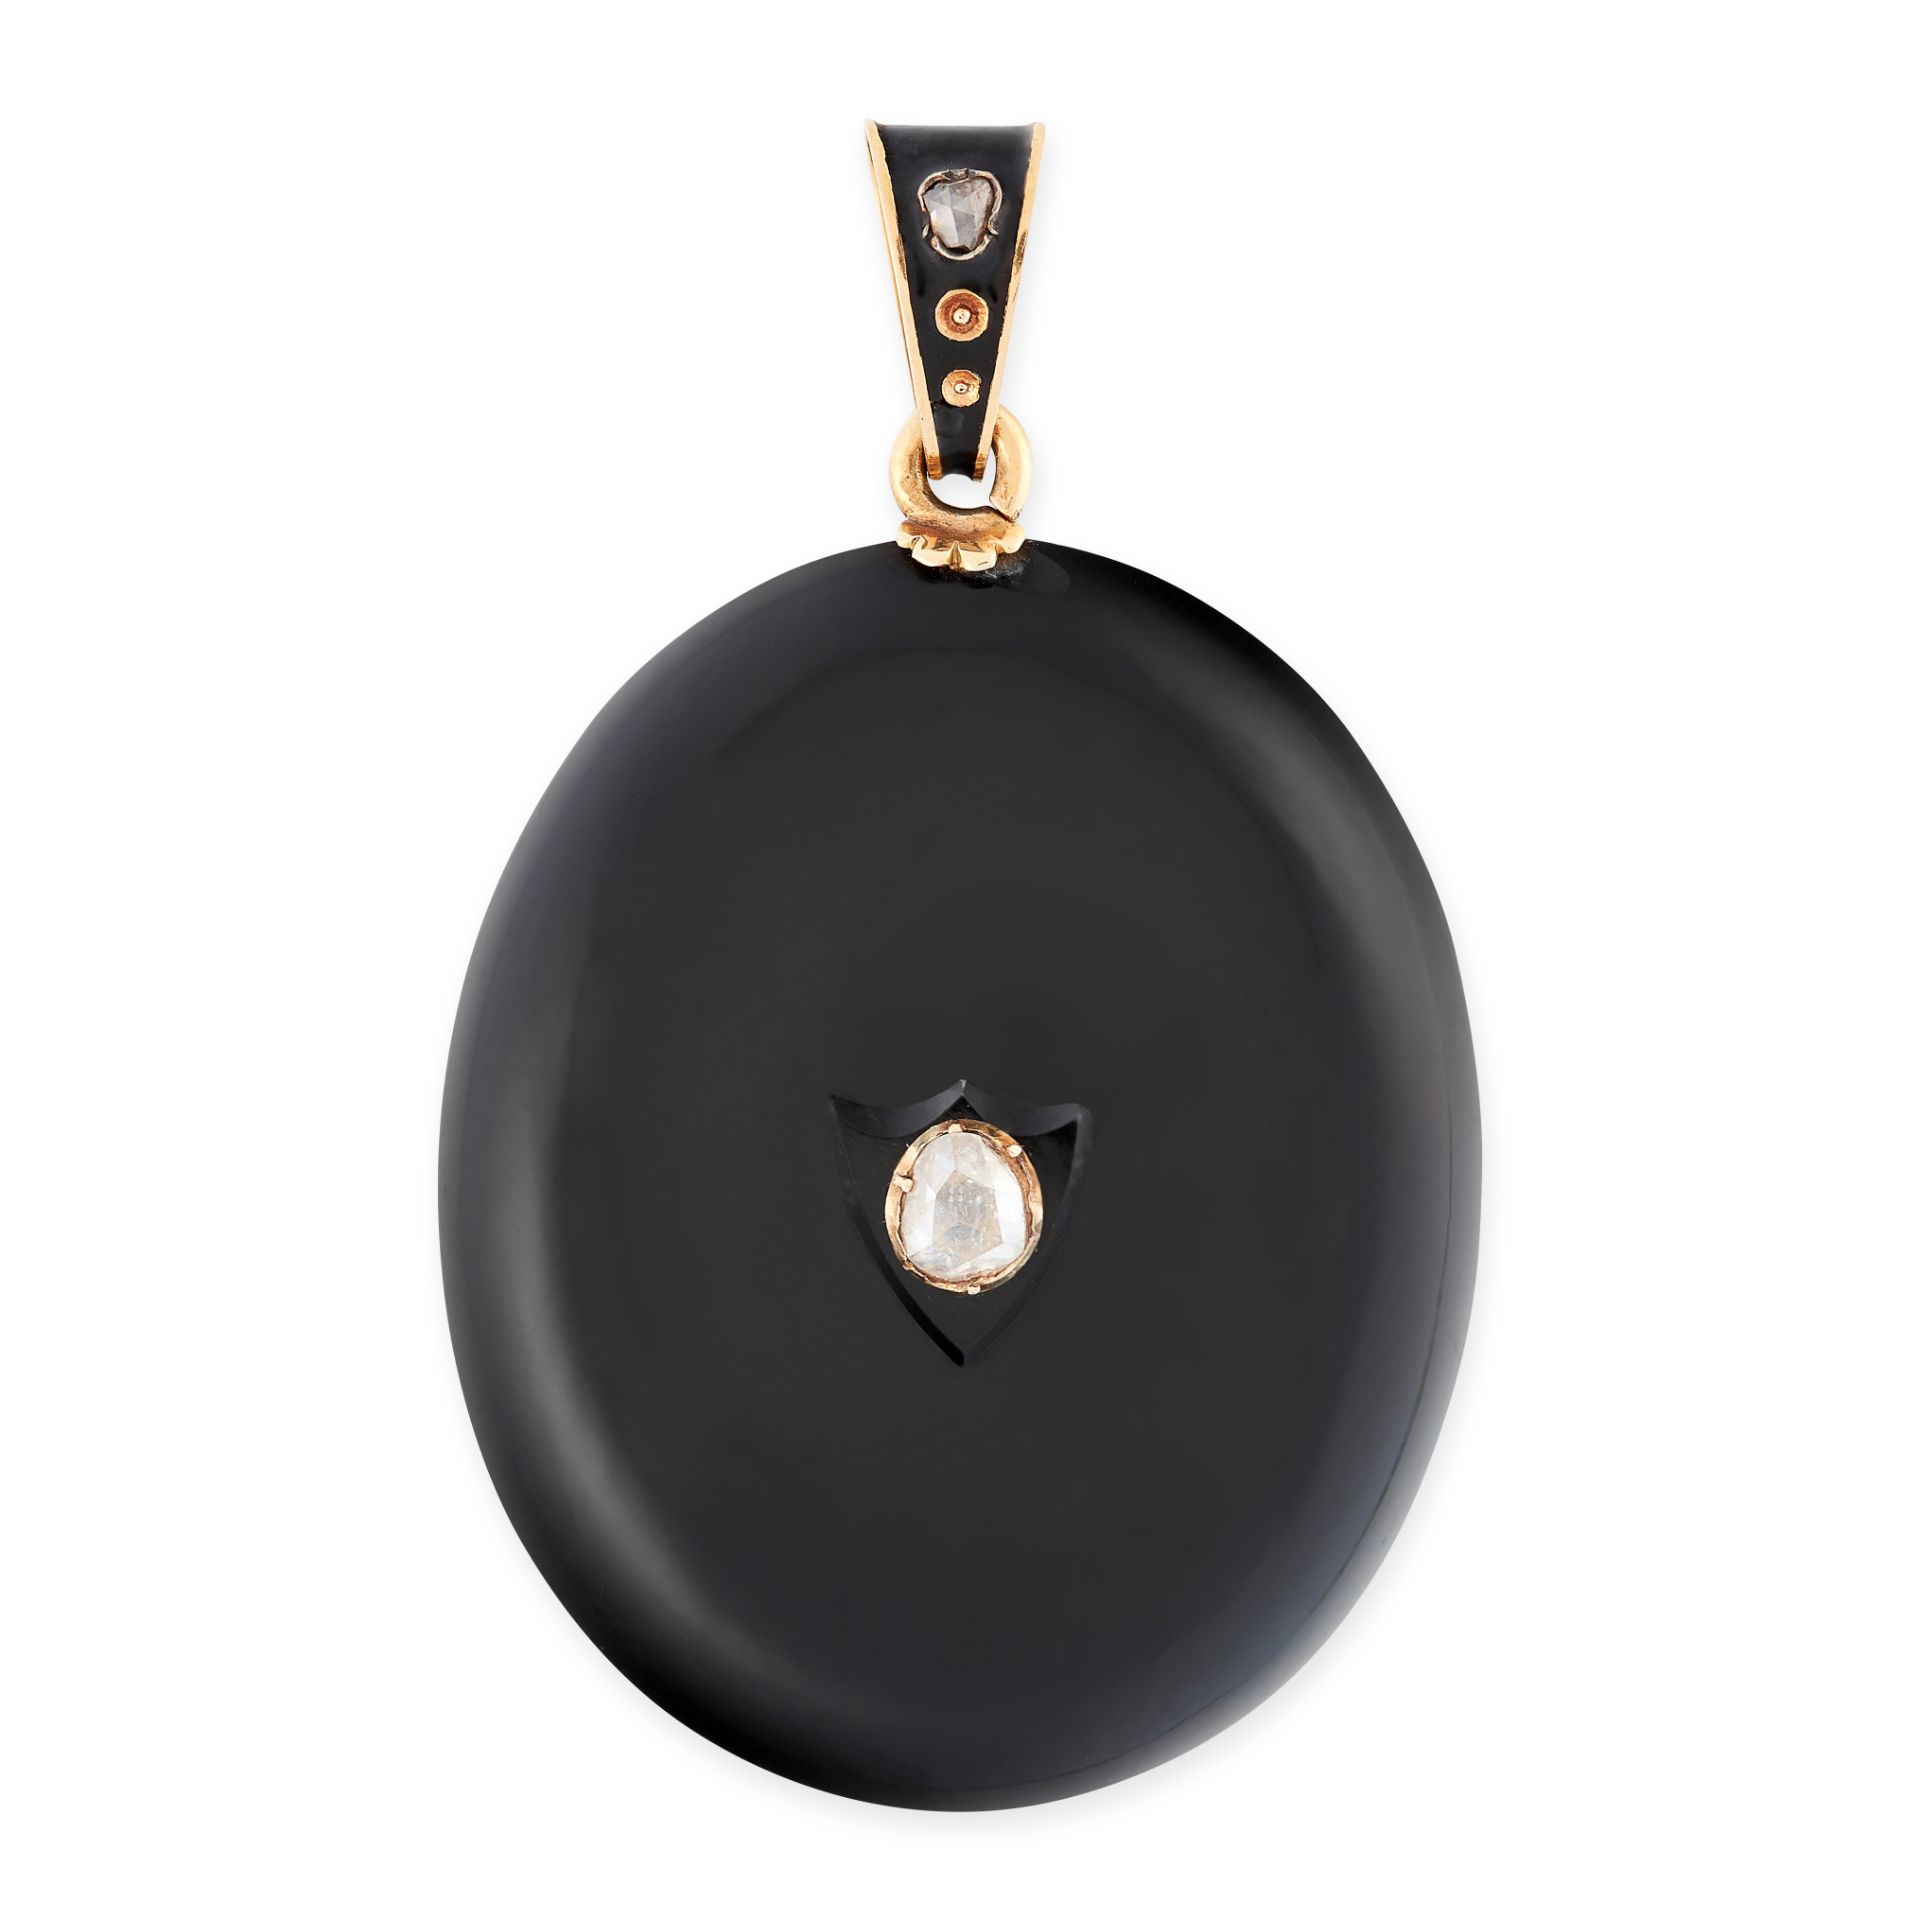 AN ANTIQUE ONYX, ENAMEL AND DIAMOND MOURNING LOCKET PENDANT, 19TH CENTURY in yellow gold, the body